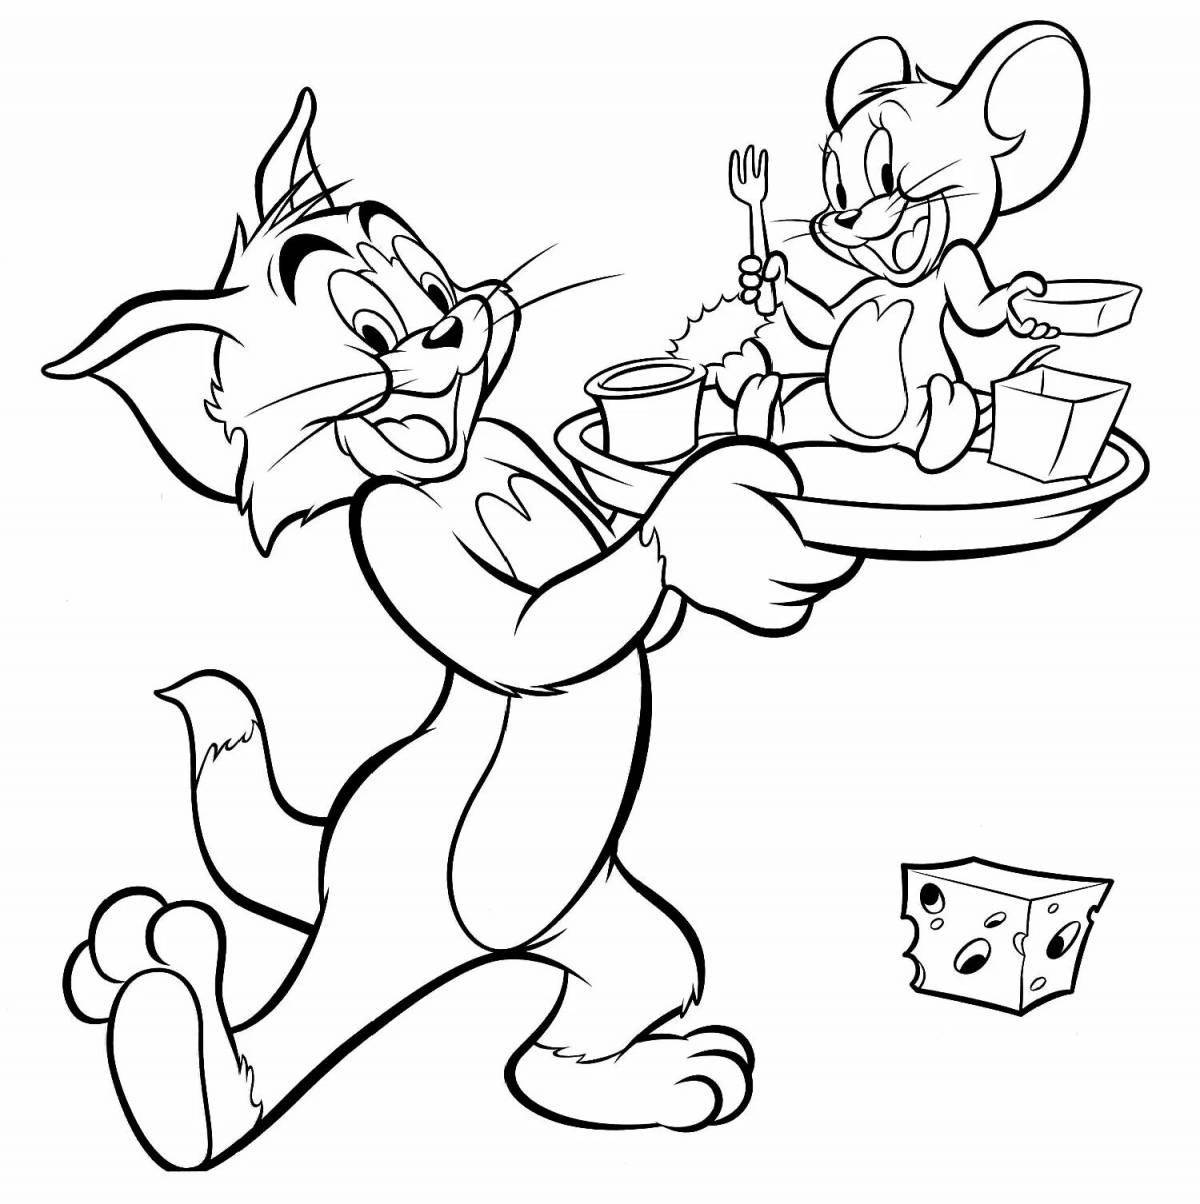 Tom and jerry #10